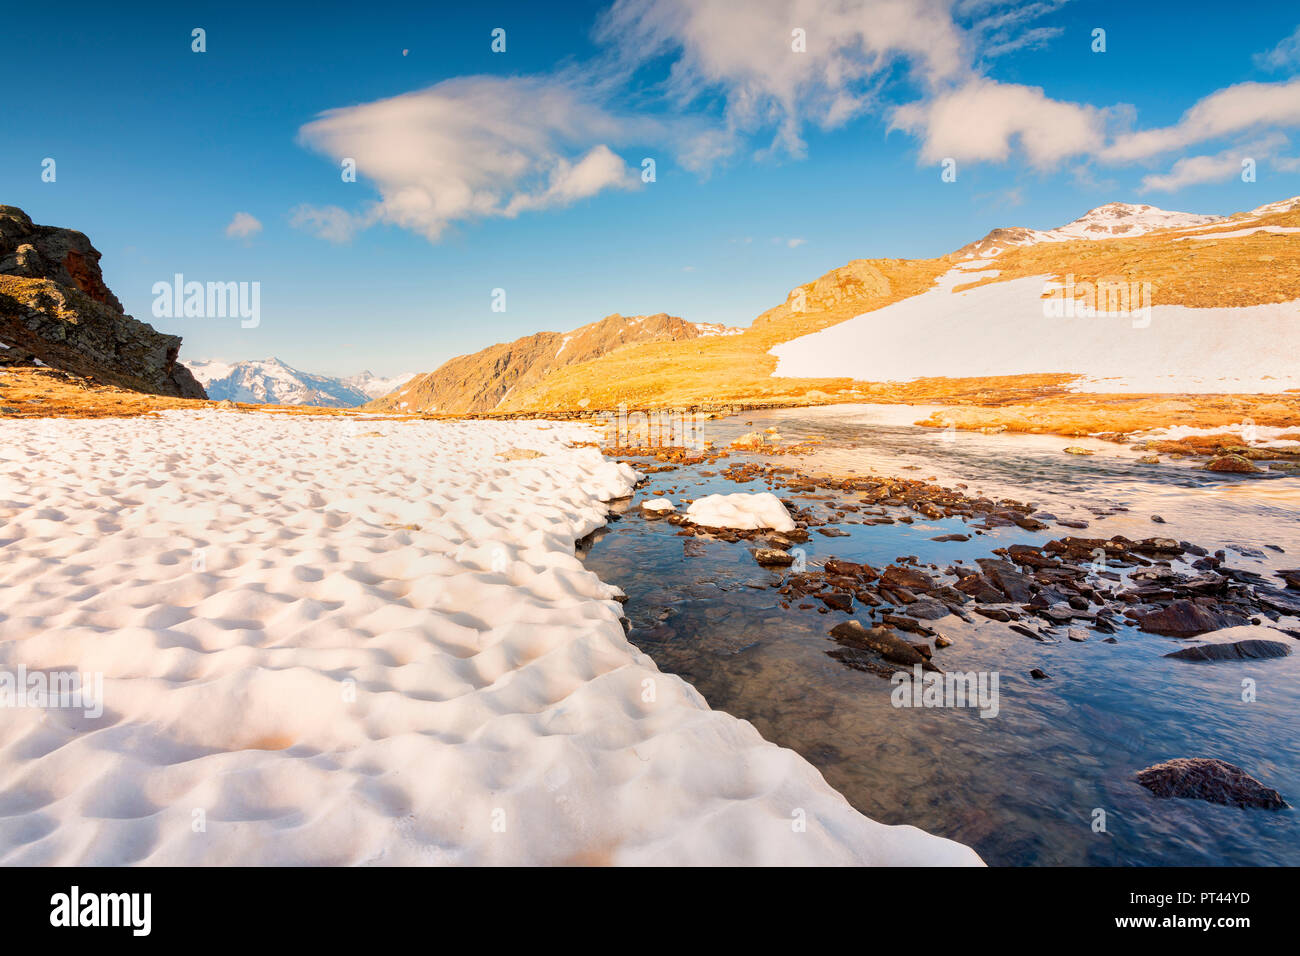 Ercavallo lake at thaw, Brescia province, Lombardy district, Italy, Stock Photo